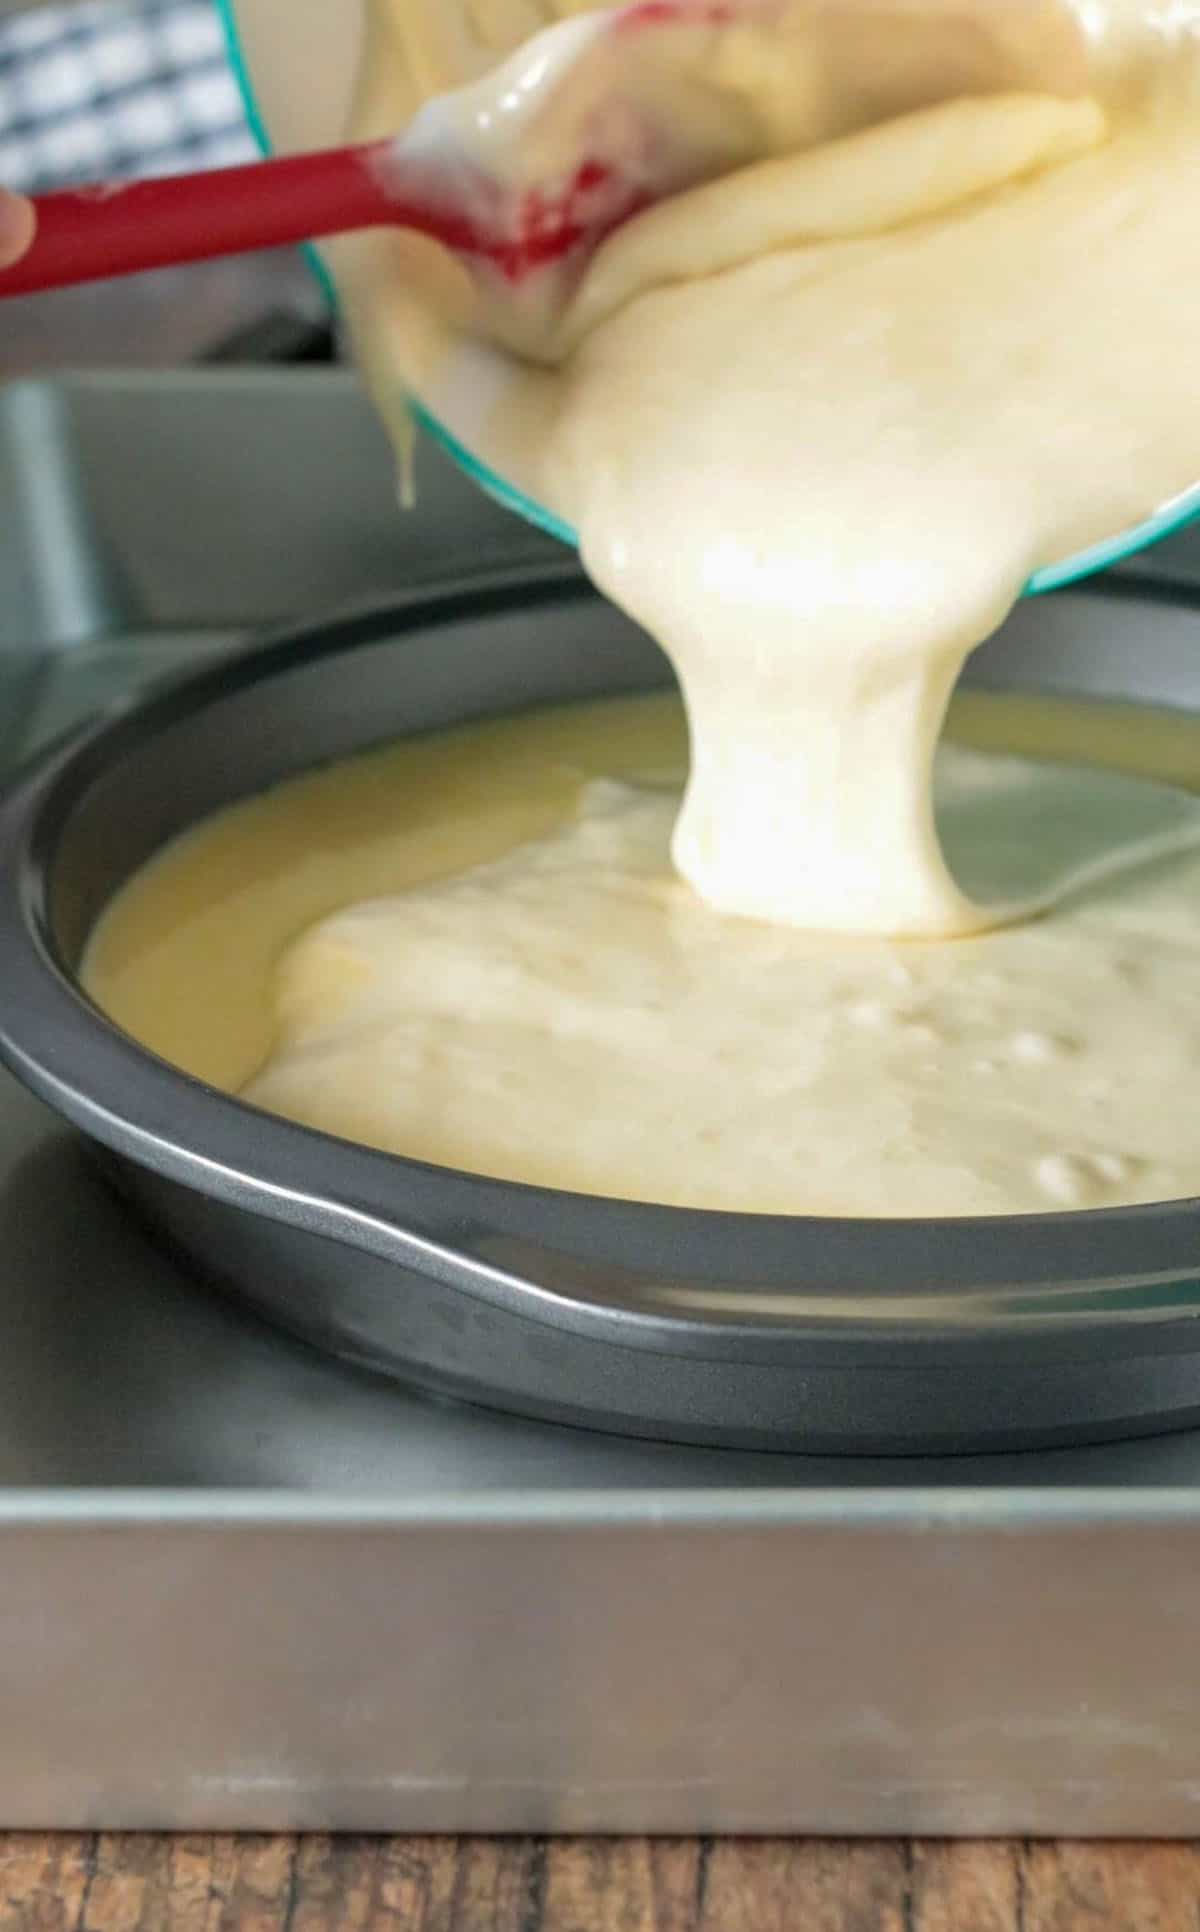 Pouring the chiffon batter over the custard in the pan.